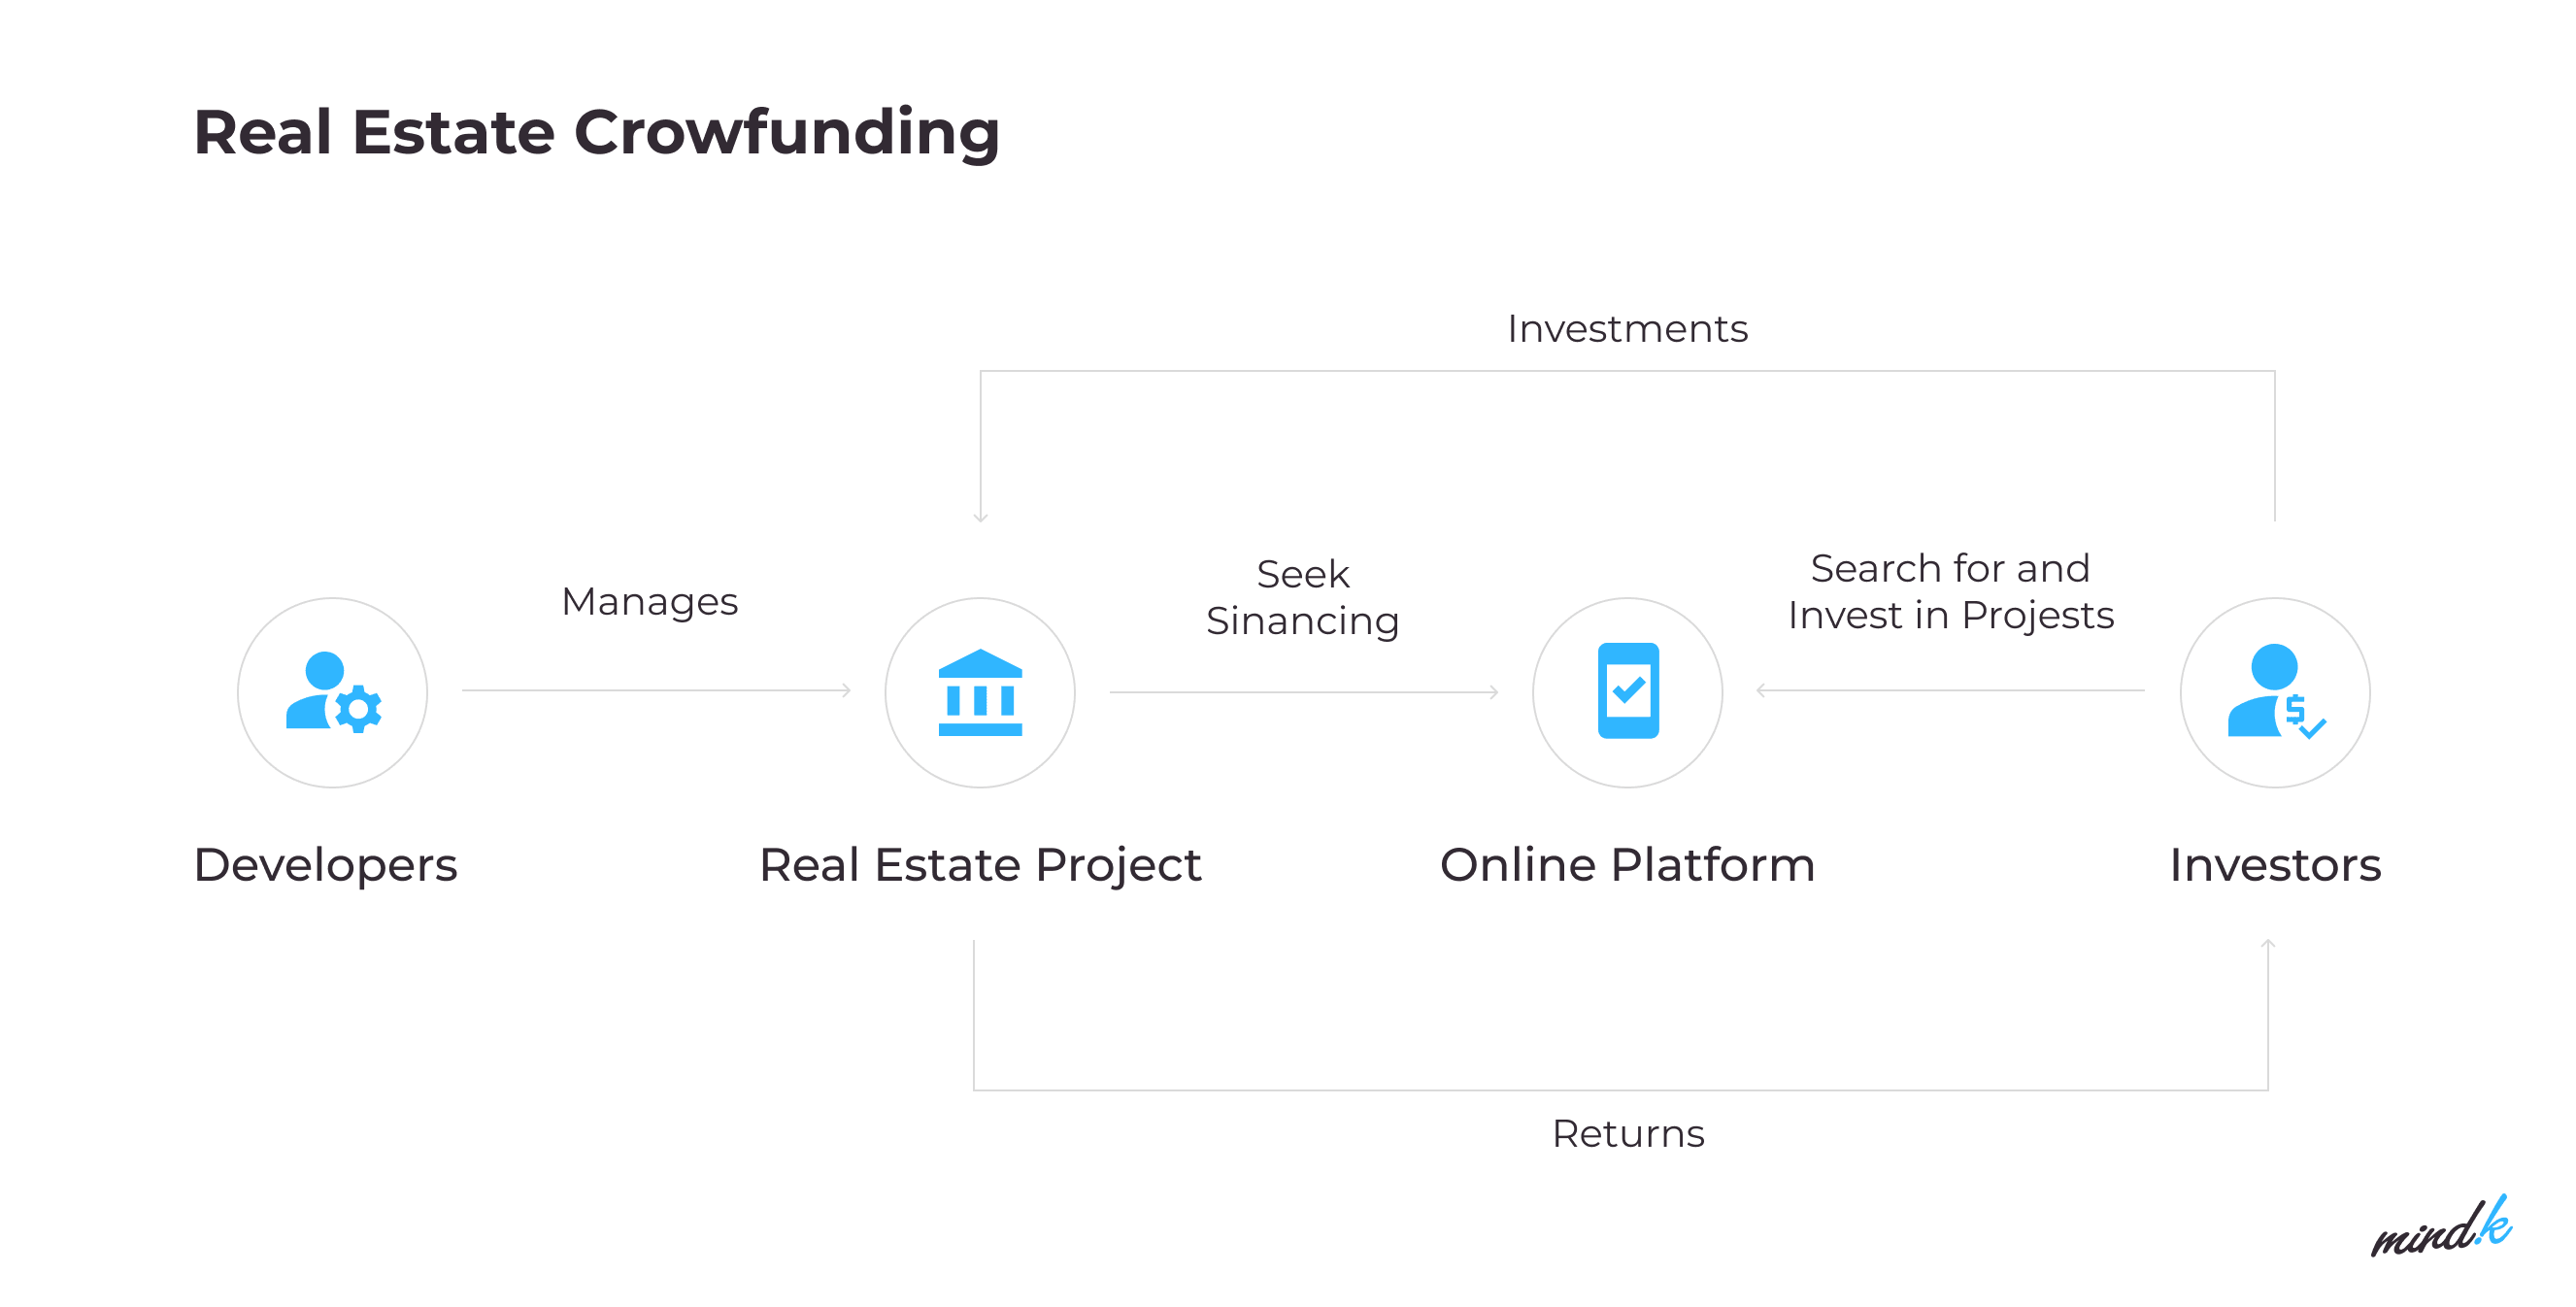 Real Estate Crowfunding how it works